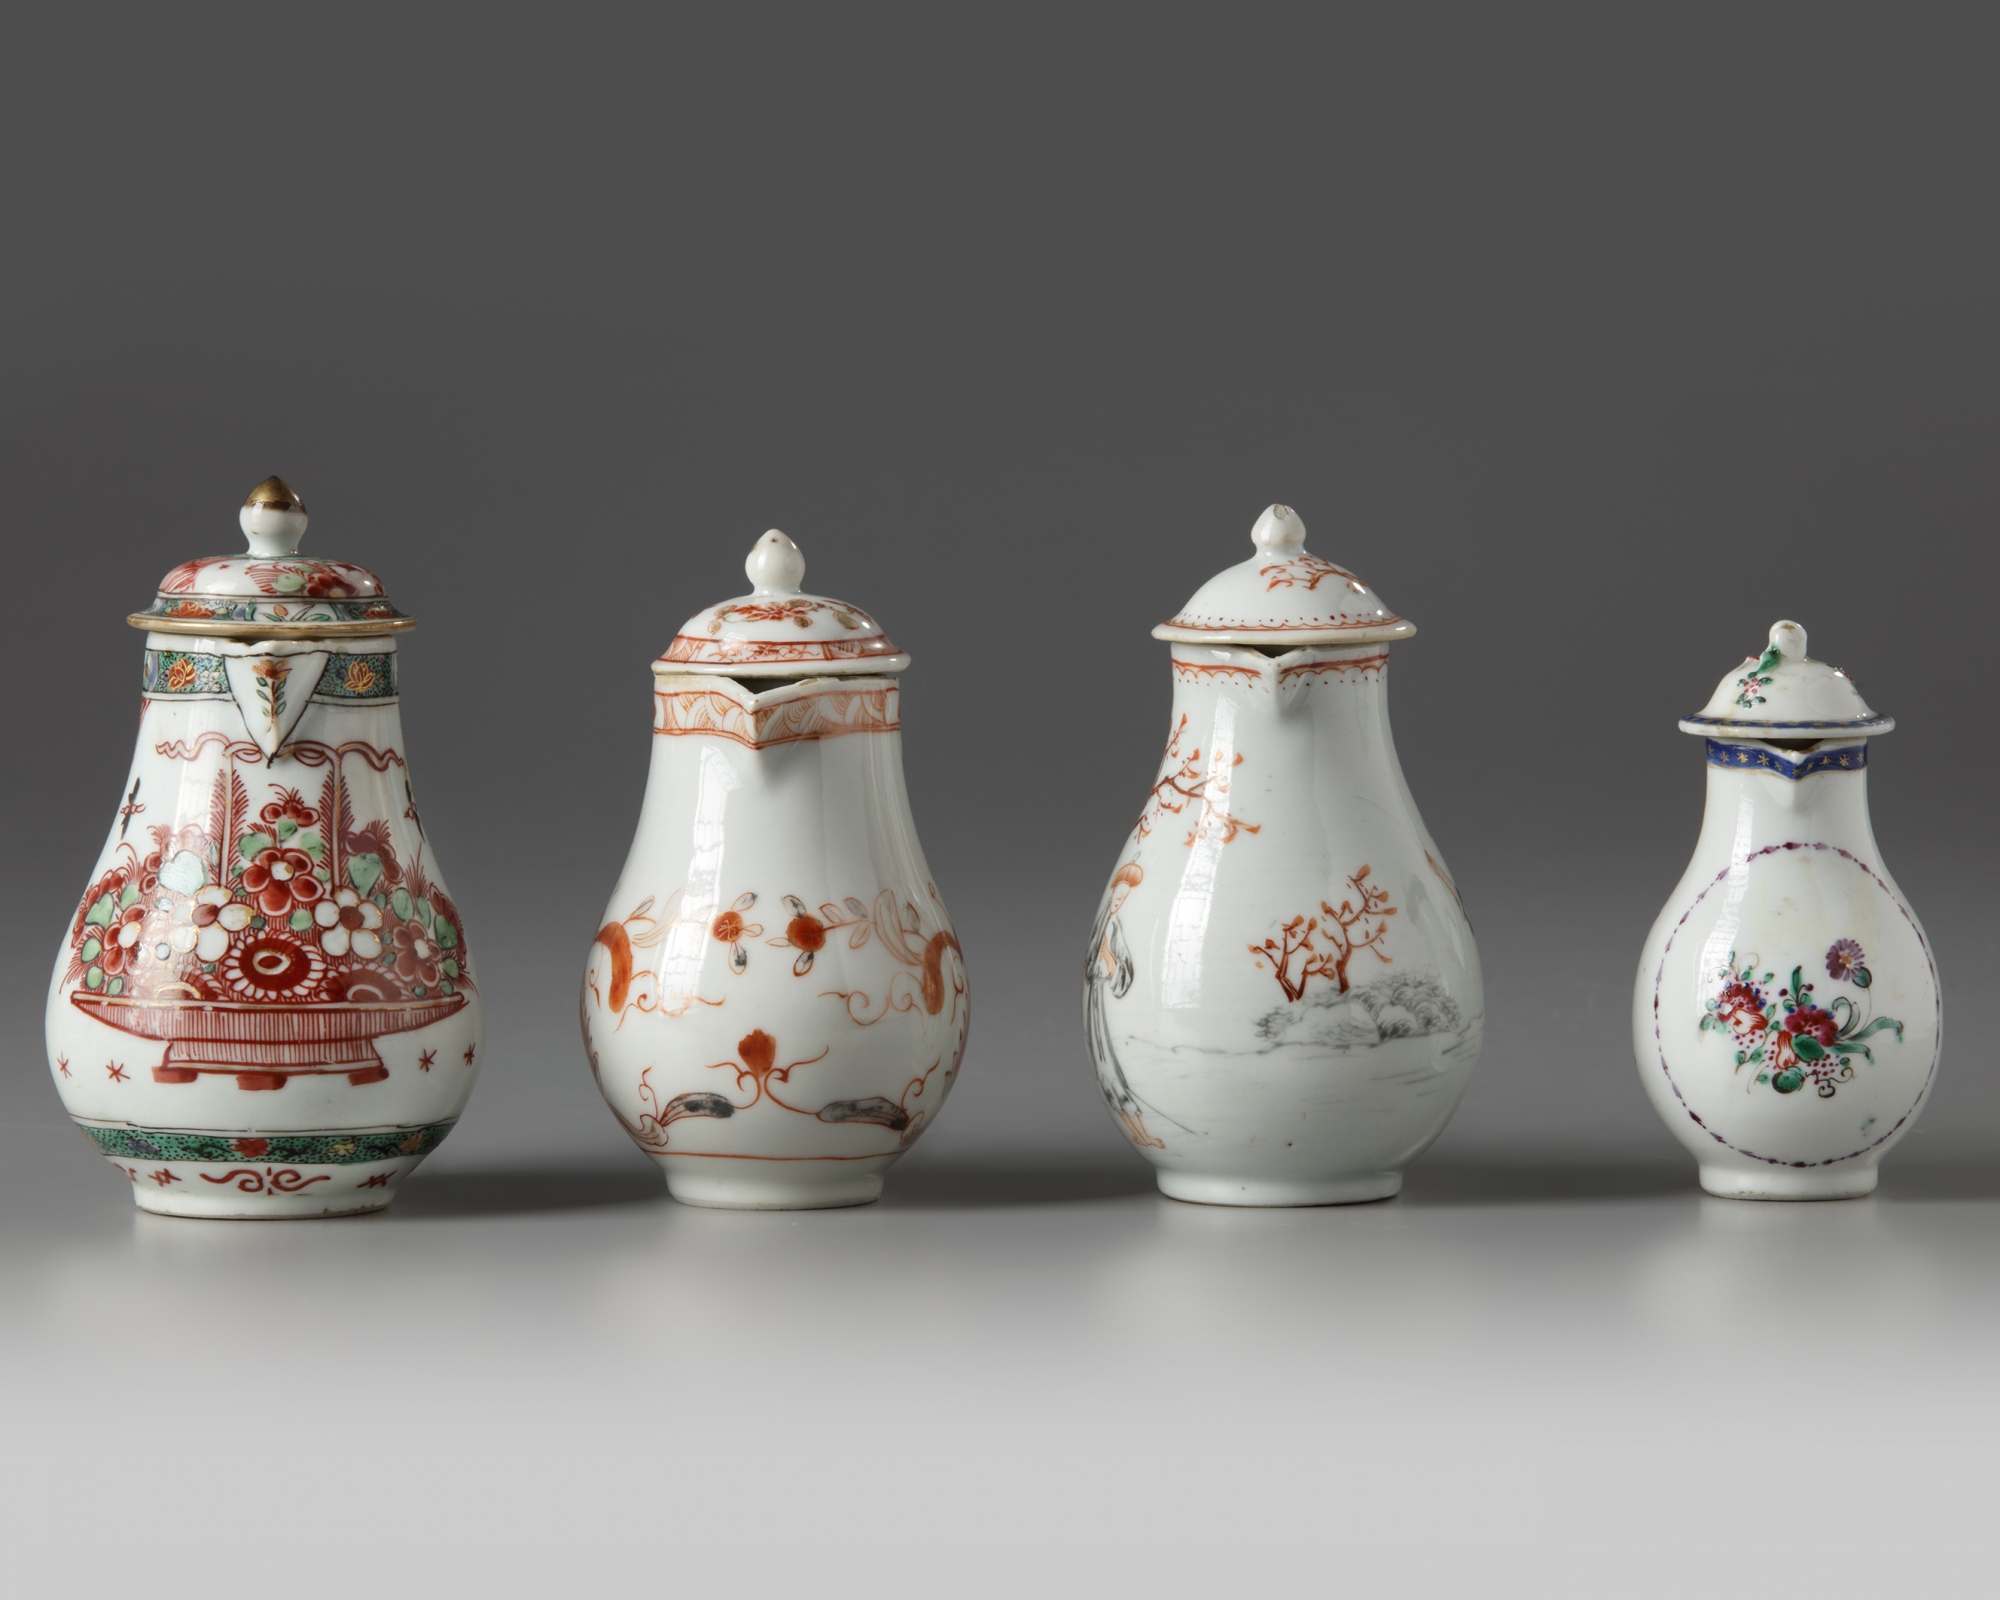 Four Chinese milk jugs and covers